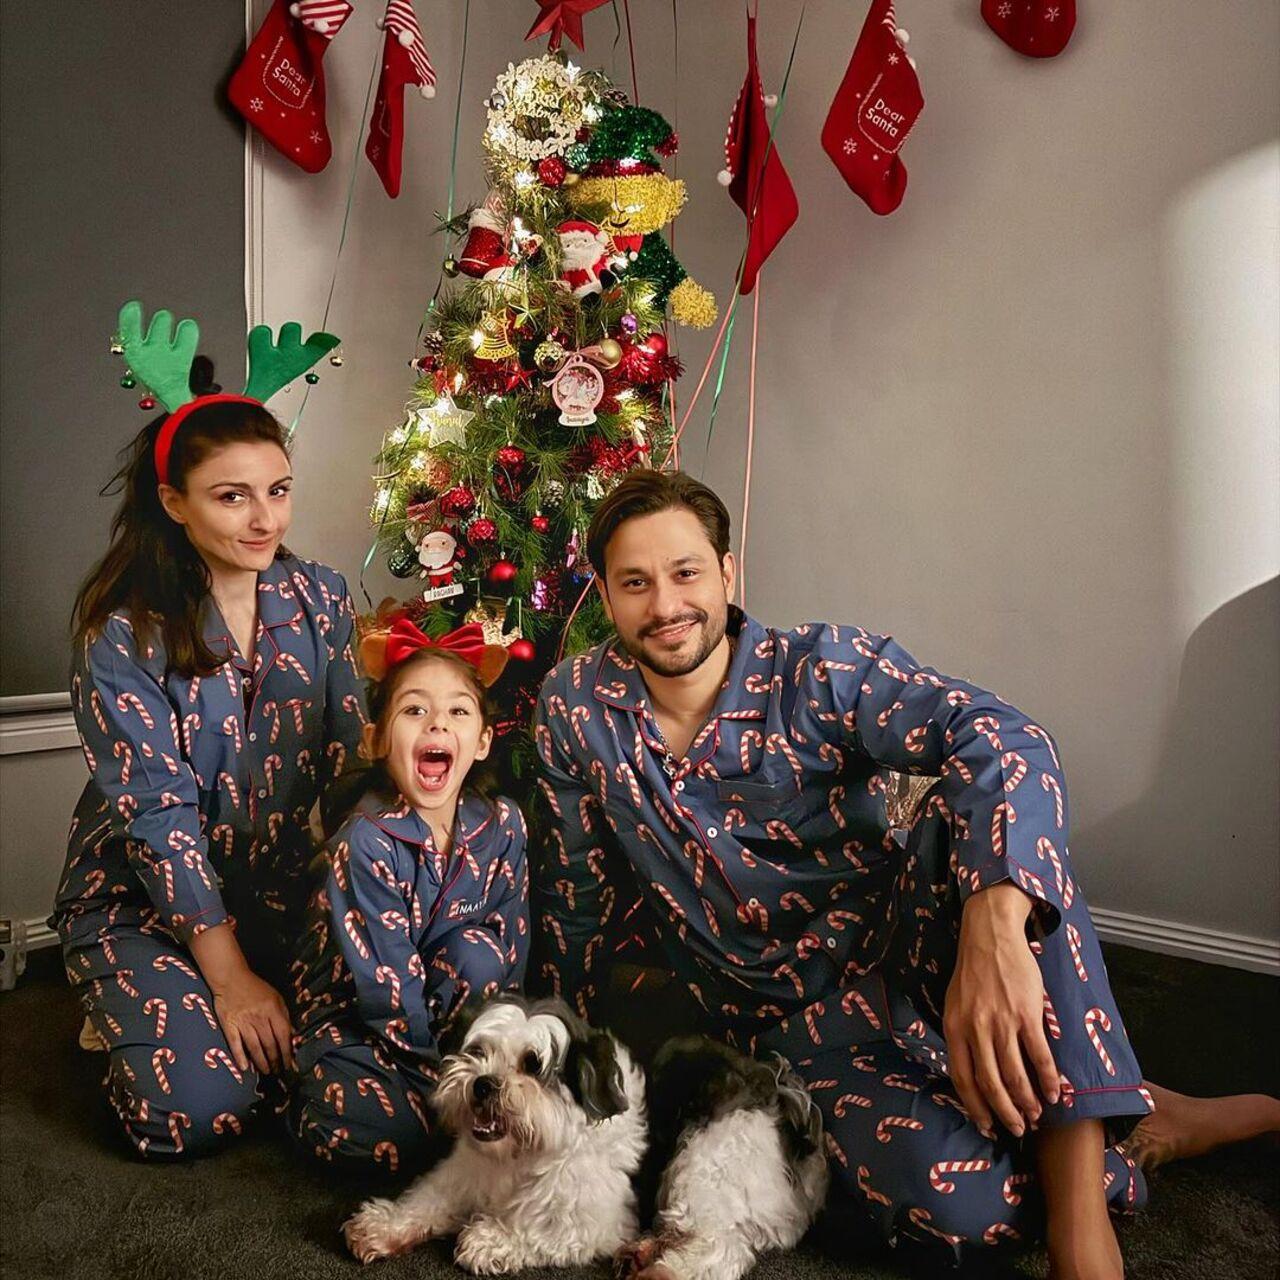 Soha Ali Khan and Kunal Kemmu ringed in Christmas with their daughter Inaaya at their Mumbai home. The trio was seen in matching pyjamas as they posed in front of the Christmas tree